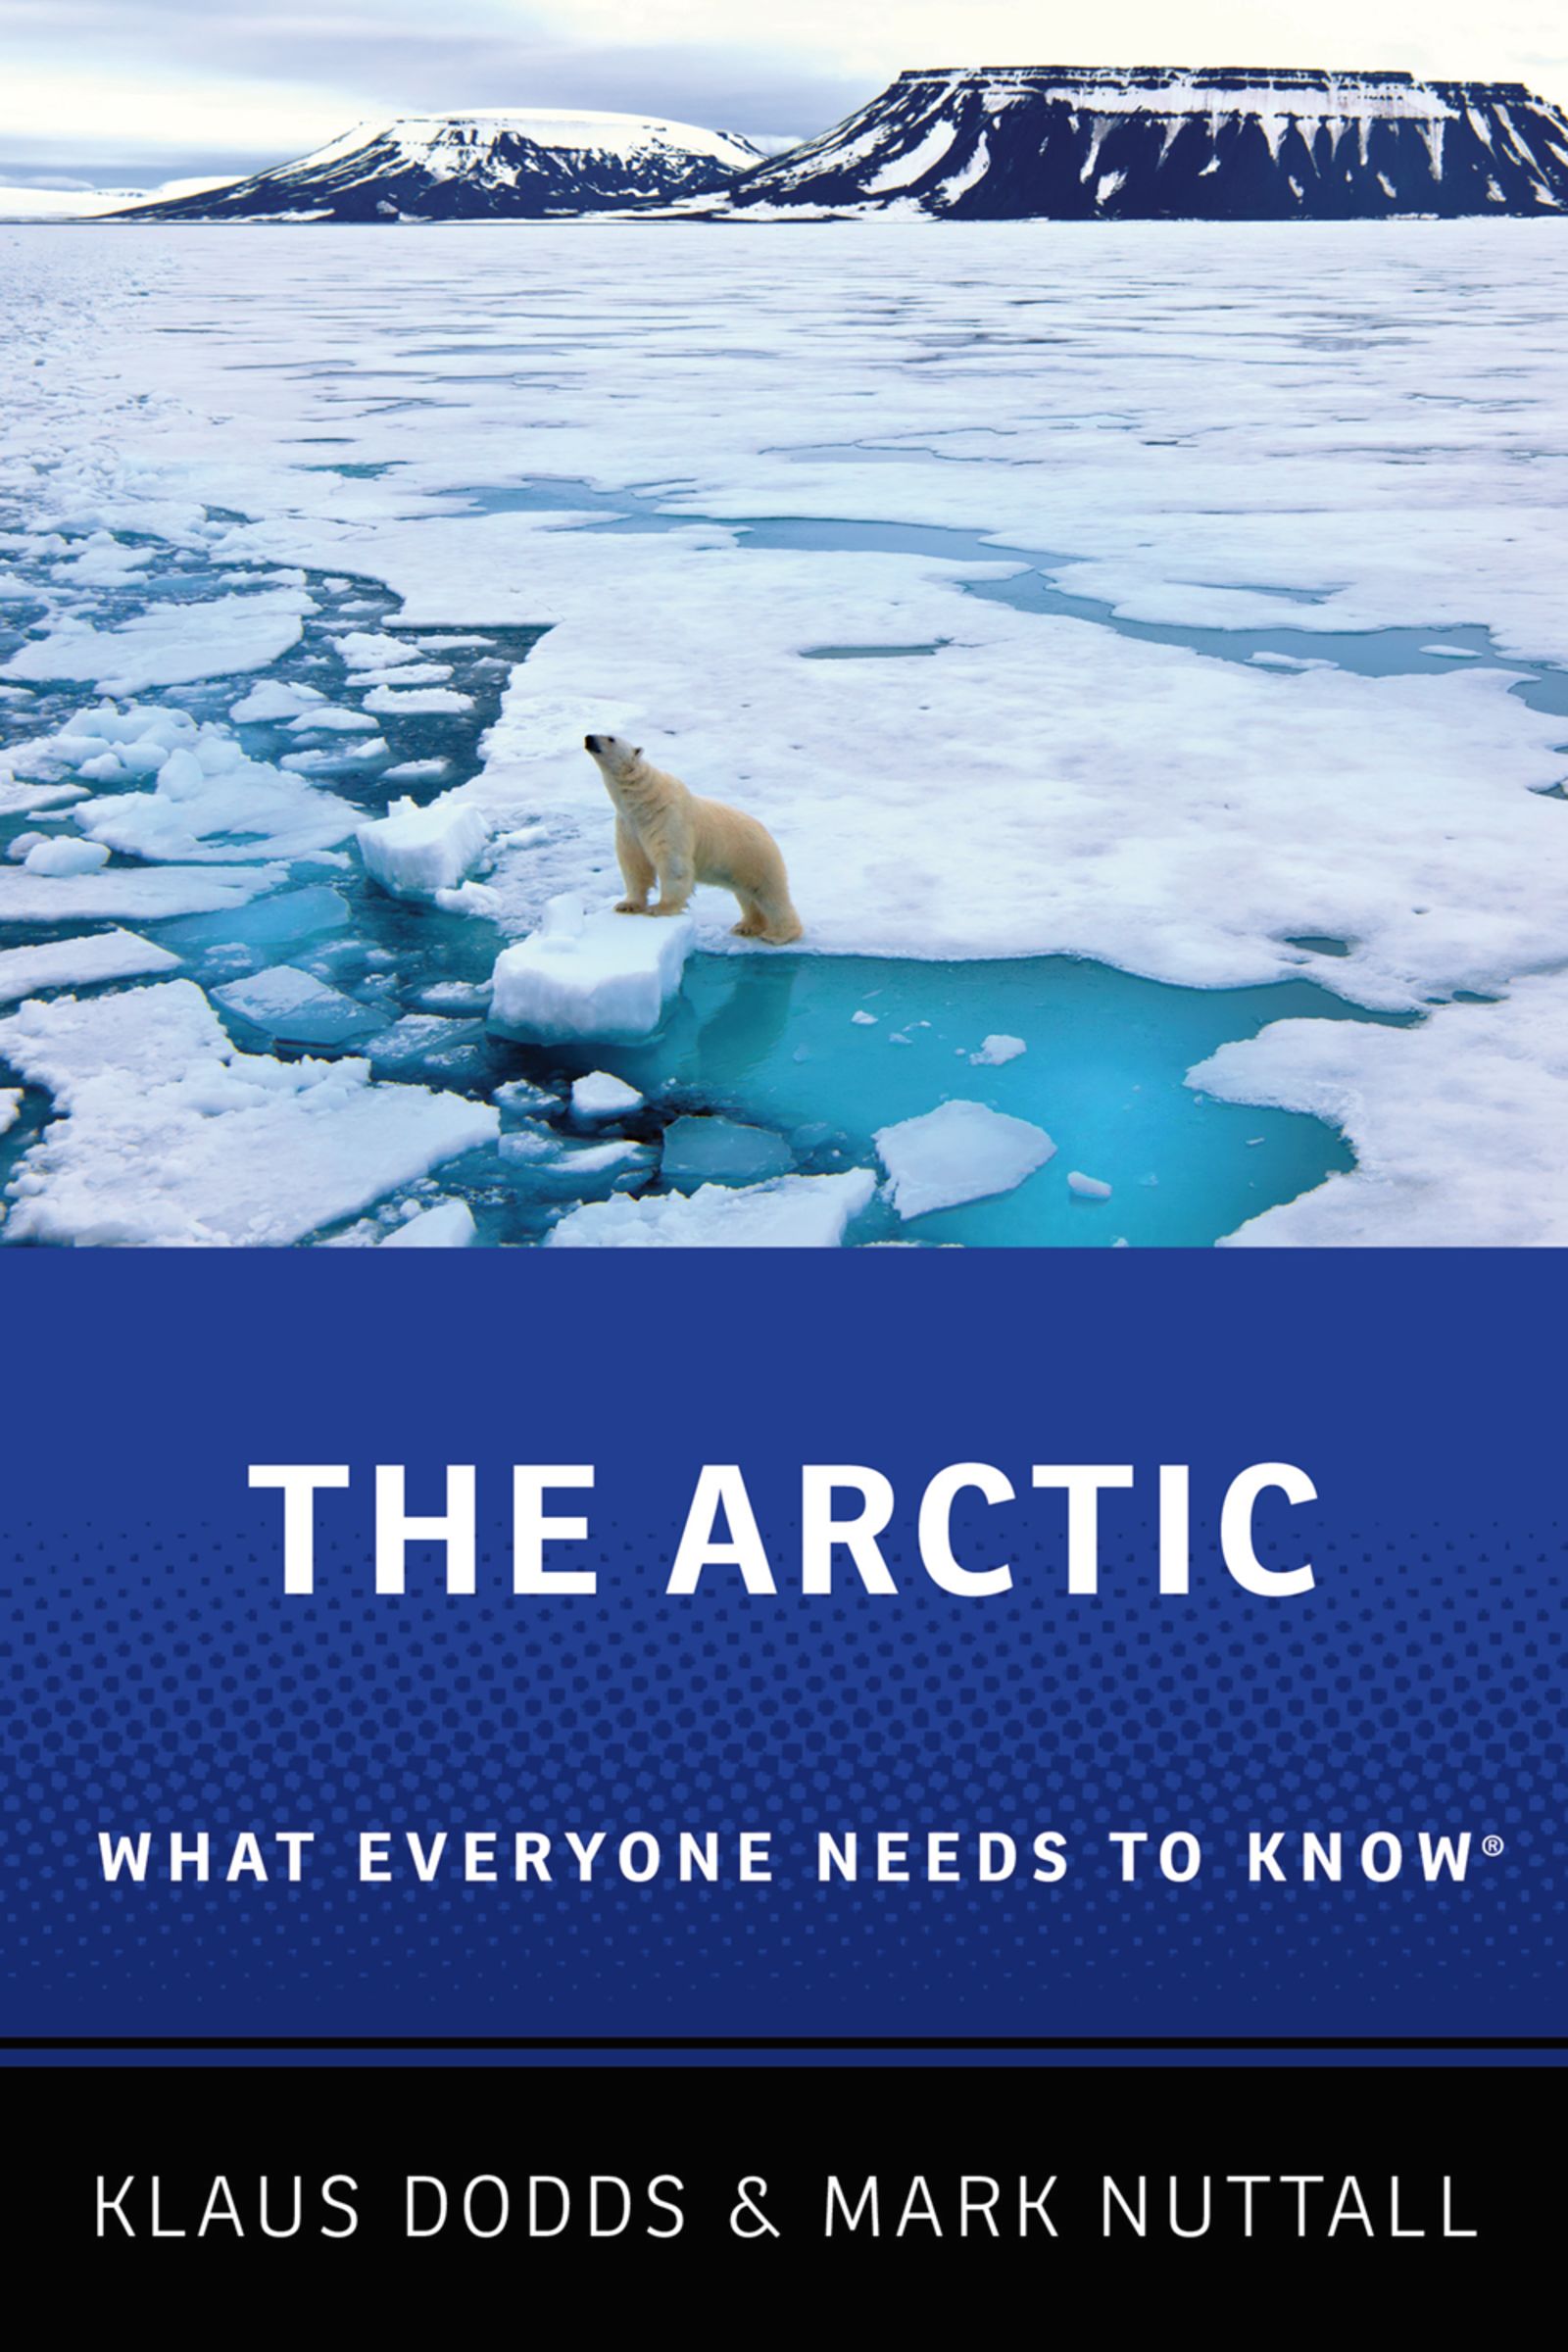 Couverture du livre "The Arctic : what everyone needs to know".